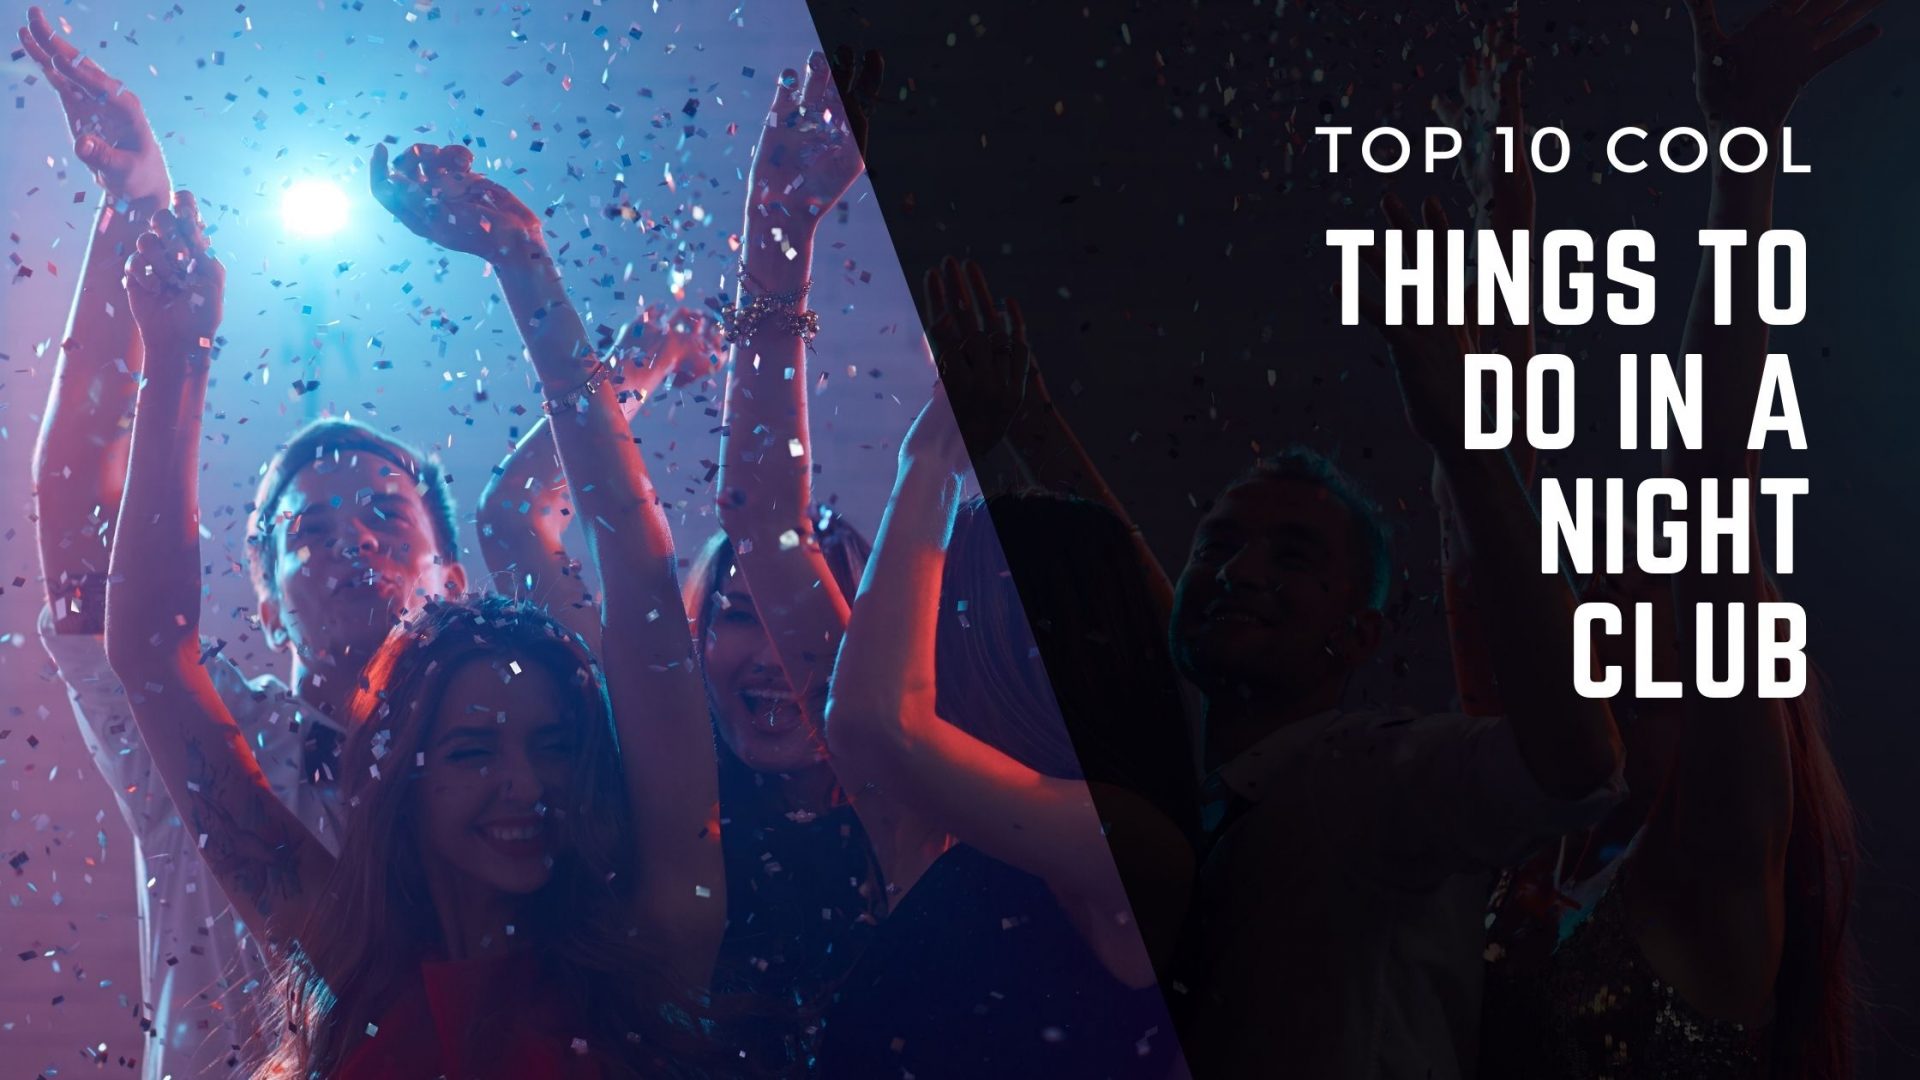 Top 10 Cool Things To Do In A Nightclub - Club Bookers